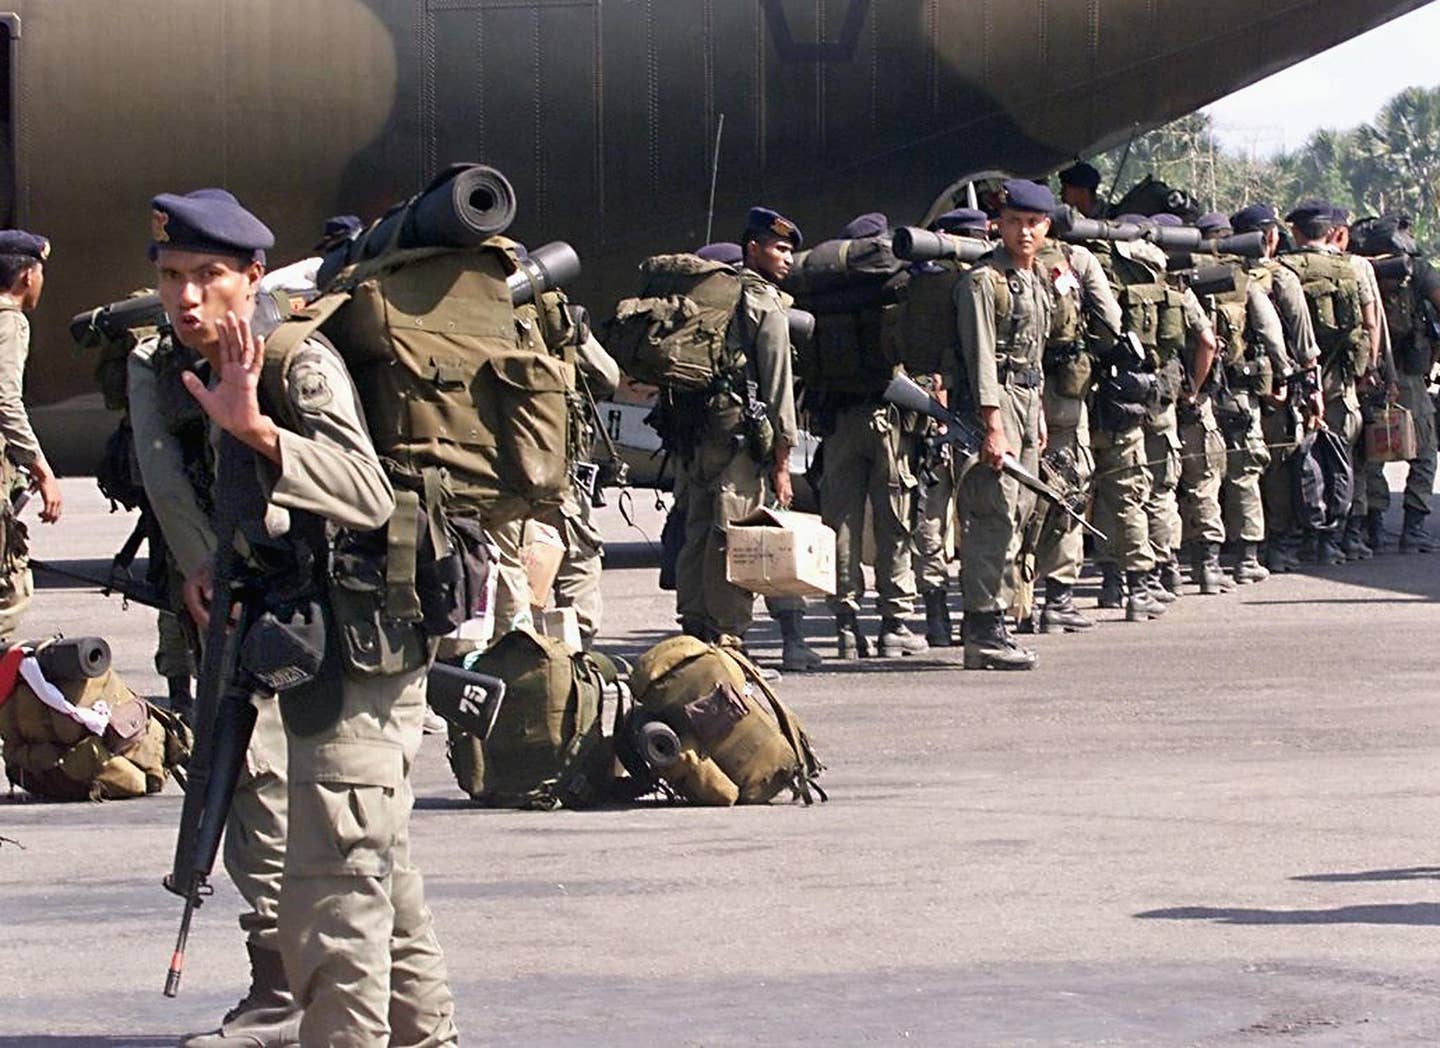 A member of the Indonesian Mobile Police Brigade tries to stop a photographer from taking pictures of his troops boarding an Indonesian Air Force transport plane at Dili Airport in October 1999. At the time, around 100 Indonesian troops were departing for Jakarta, as part of troop withdrawal after East Timor voted for independence from Indonesia.  <em>Photo by ROMEO GACAD/AFP via Getty Images</em>